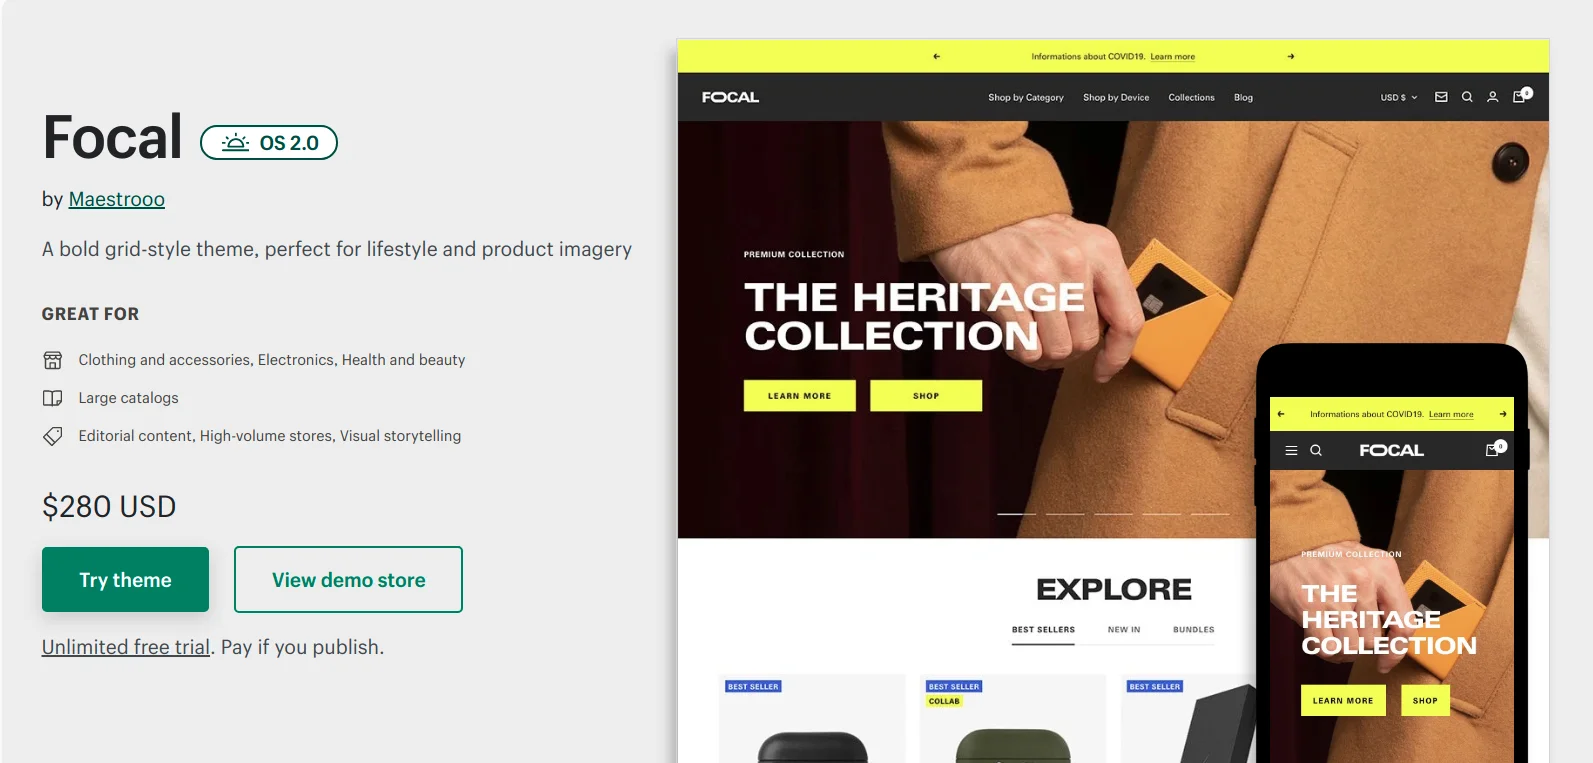 focal-online-store-2-shopify-theme